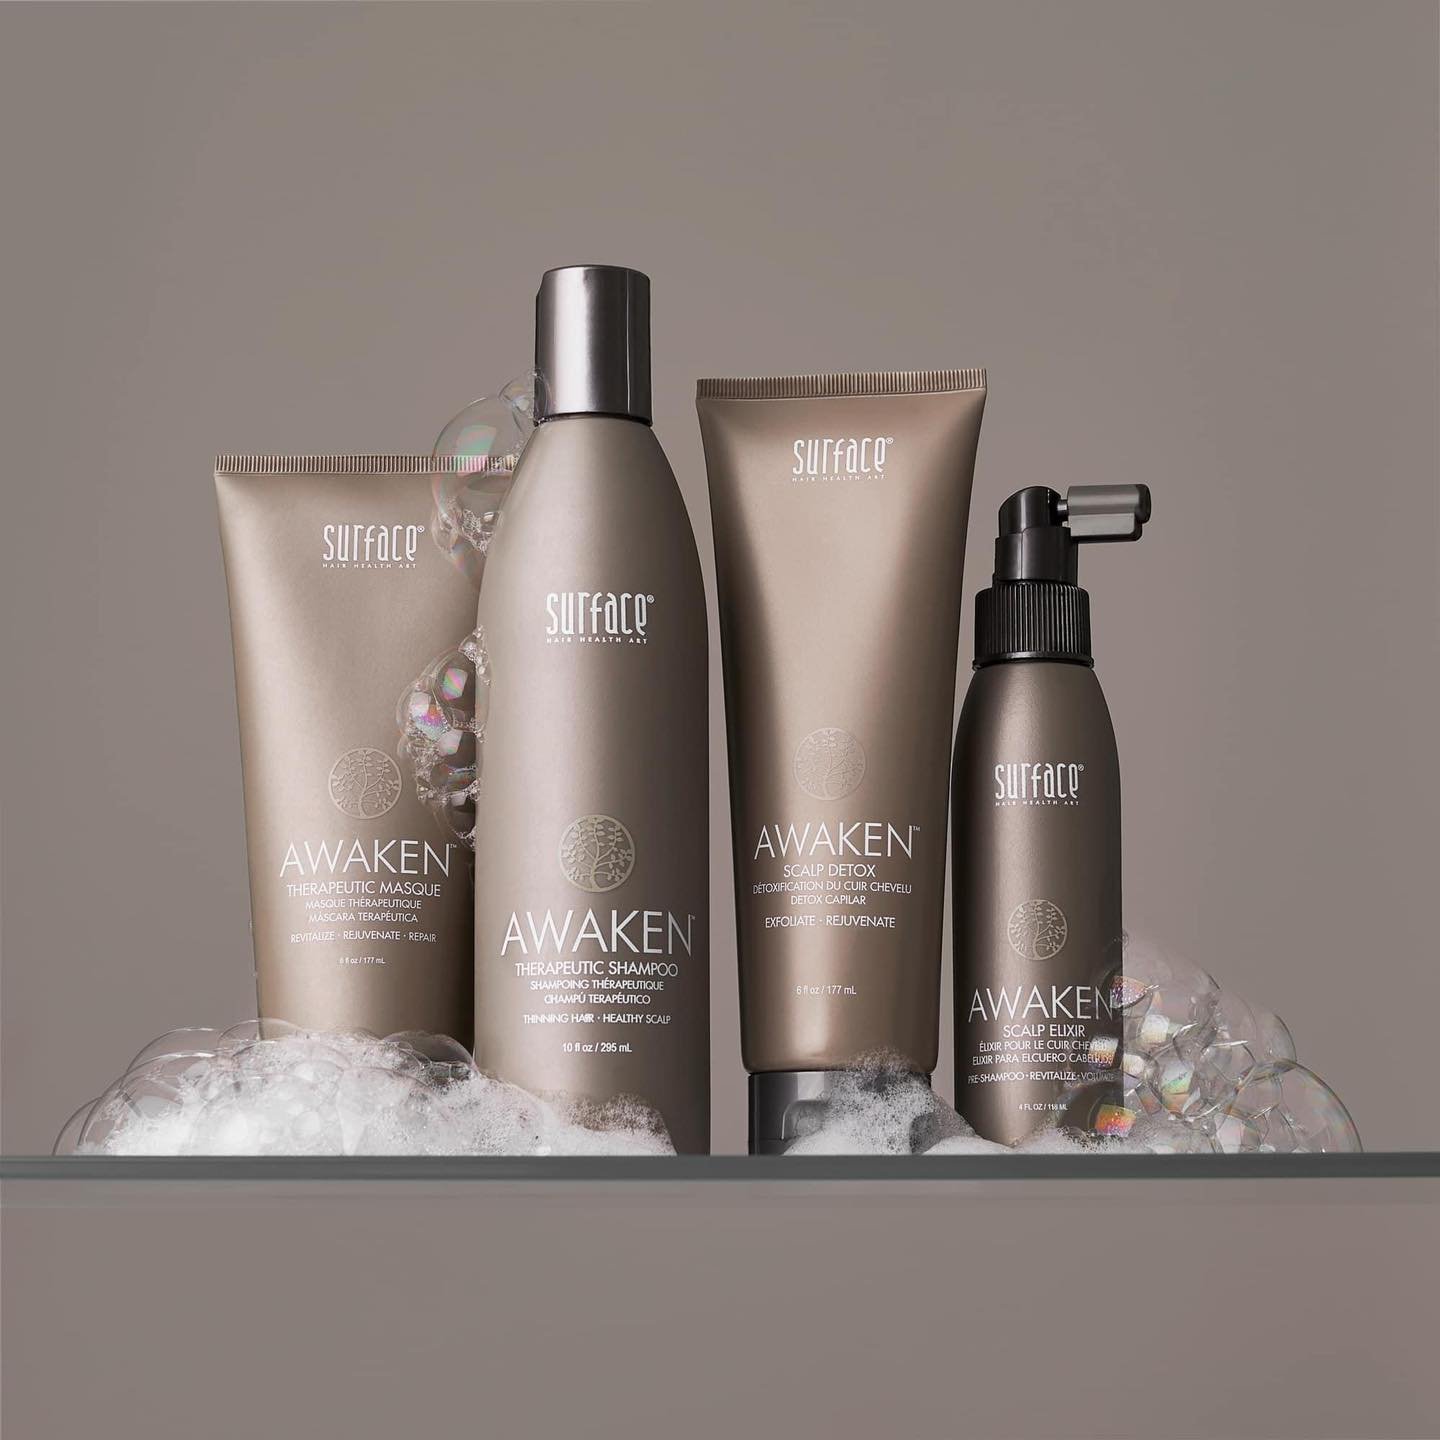 Treat your scalp to a luxurious spa day with Awaken! 💆🏼&zwj;♀️ 

Awaken, enriched with botanical extracts, nurtures growth and revitalizes both scalp and hair. A clear and simple solution for all scalp concerns. Elevate your haircare routine effort